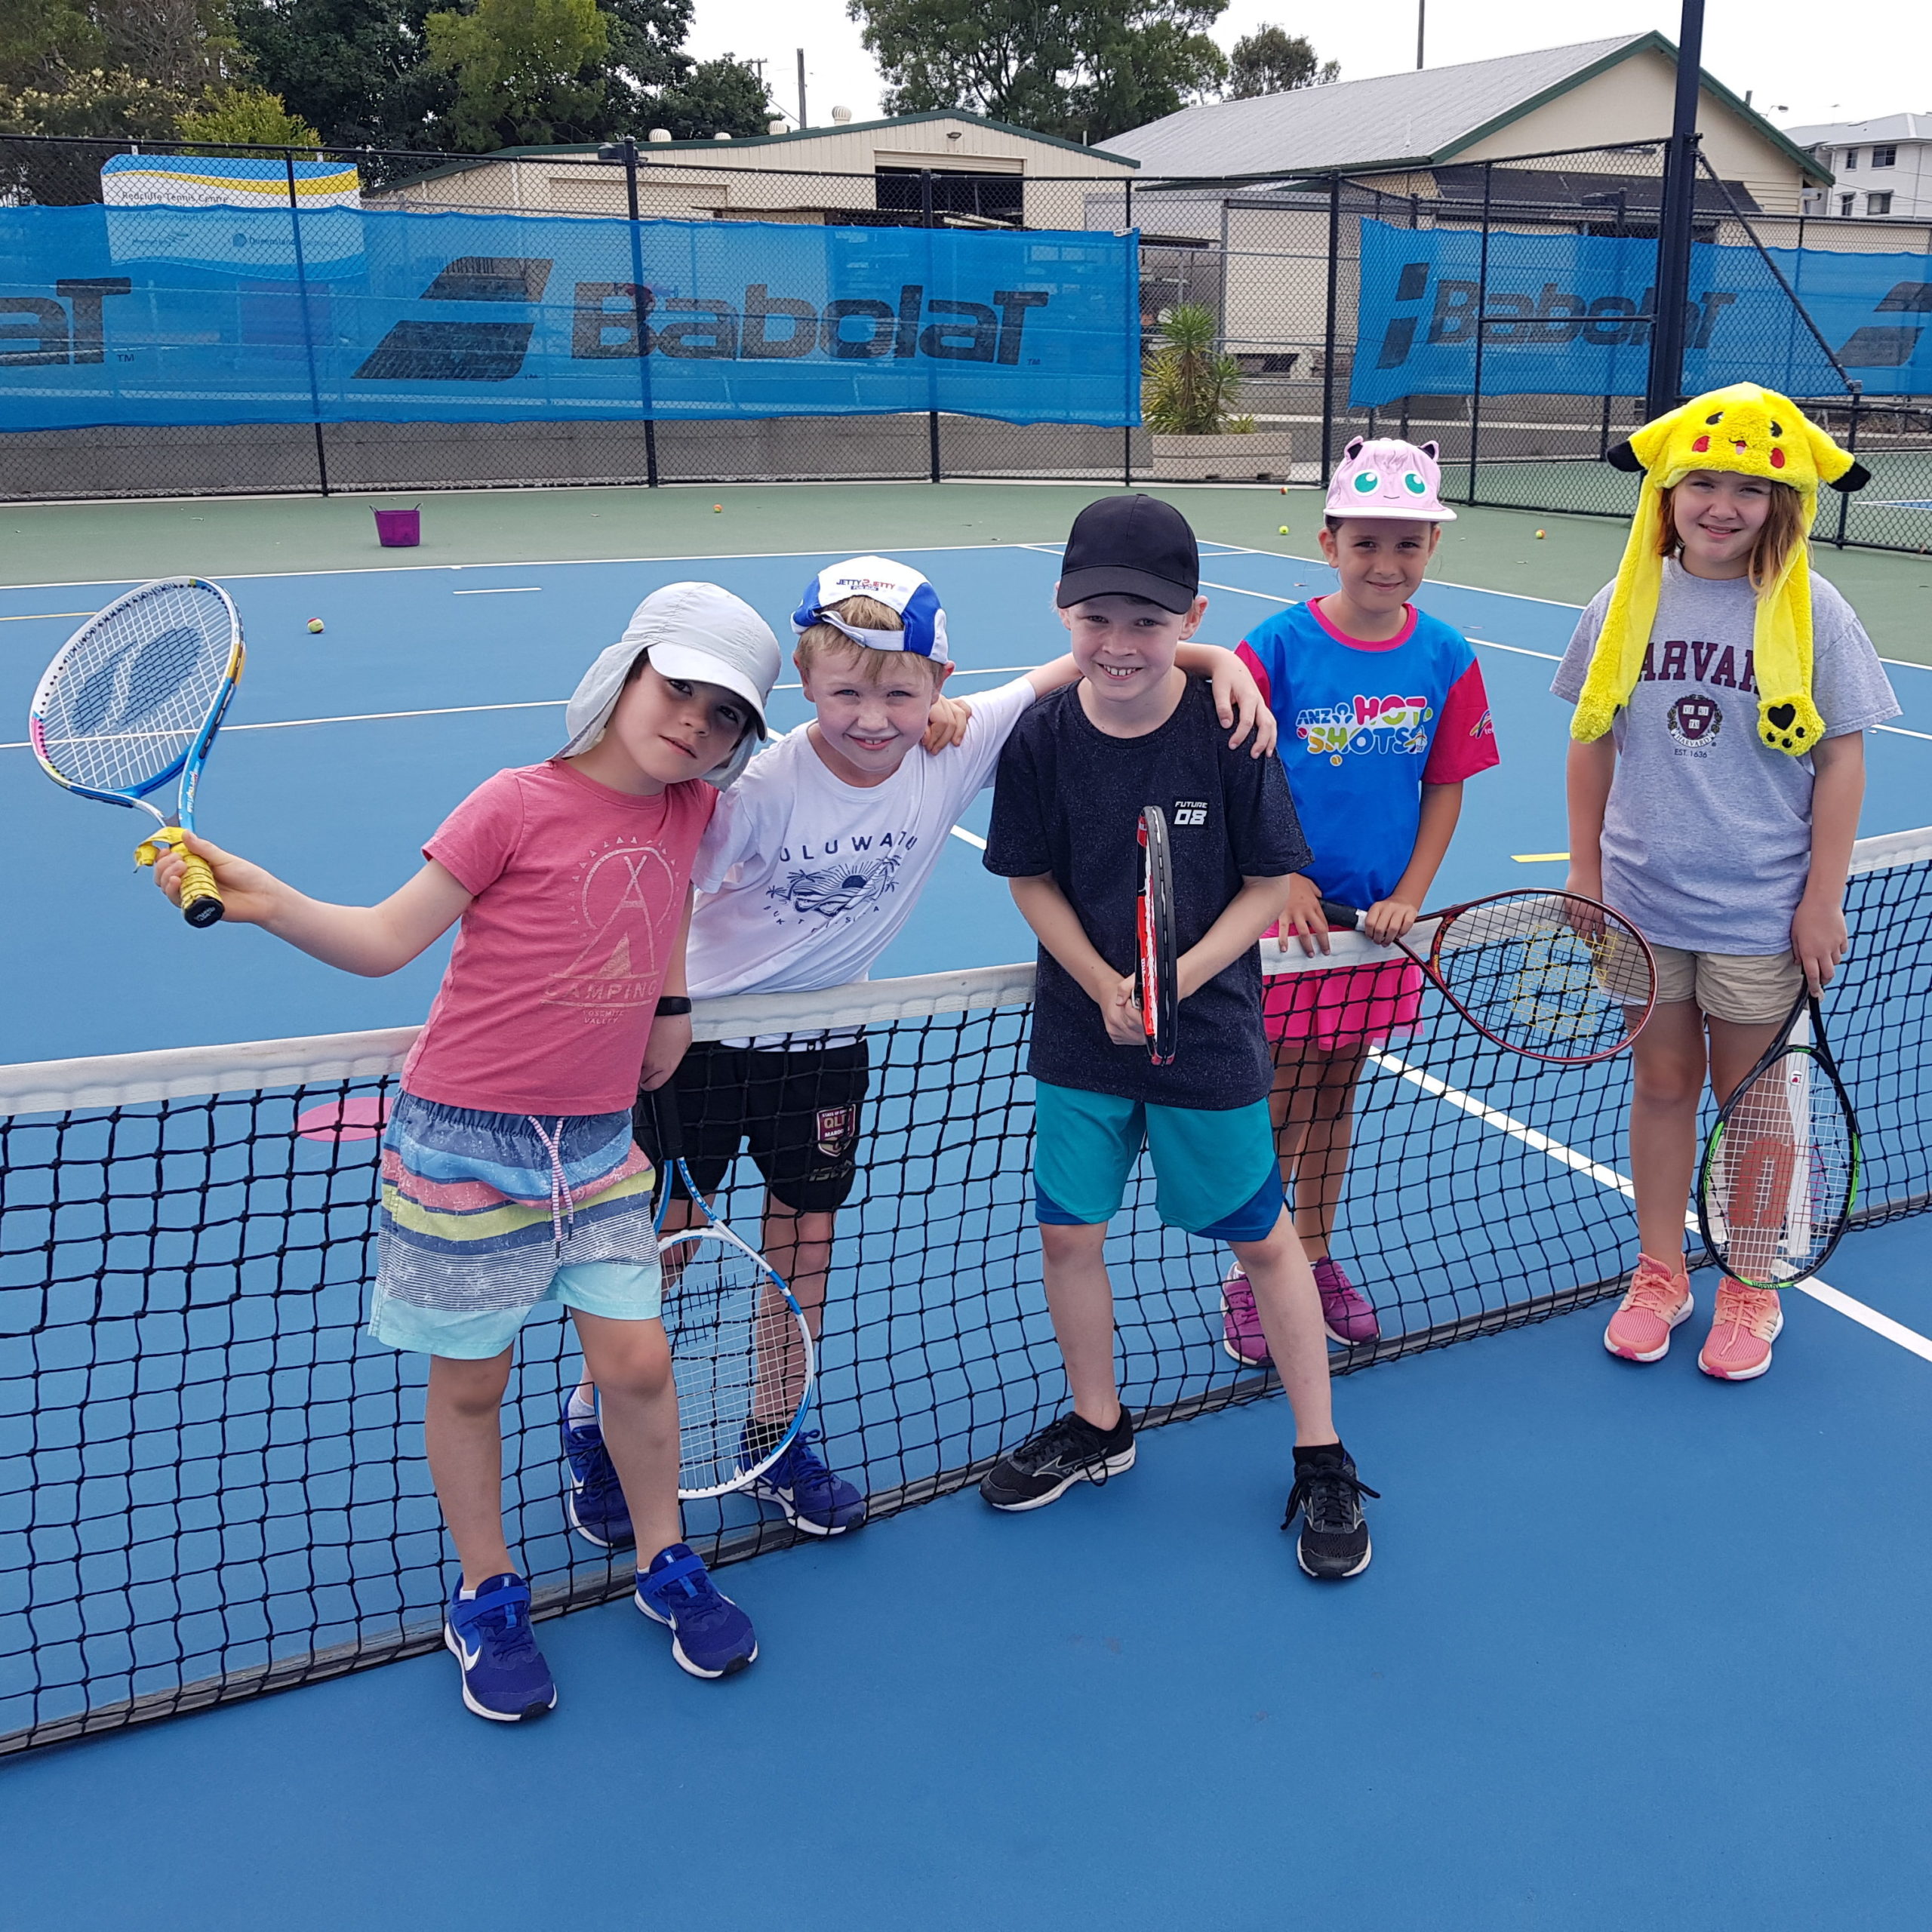 Kids smiling on tennis court at holiday school holiday tennis clinic